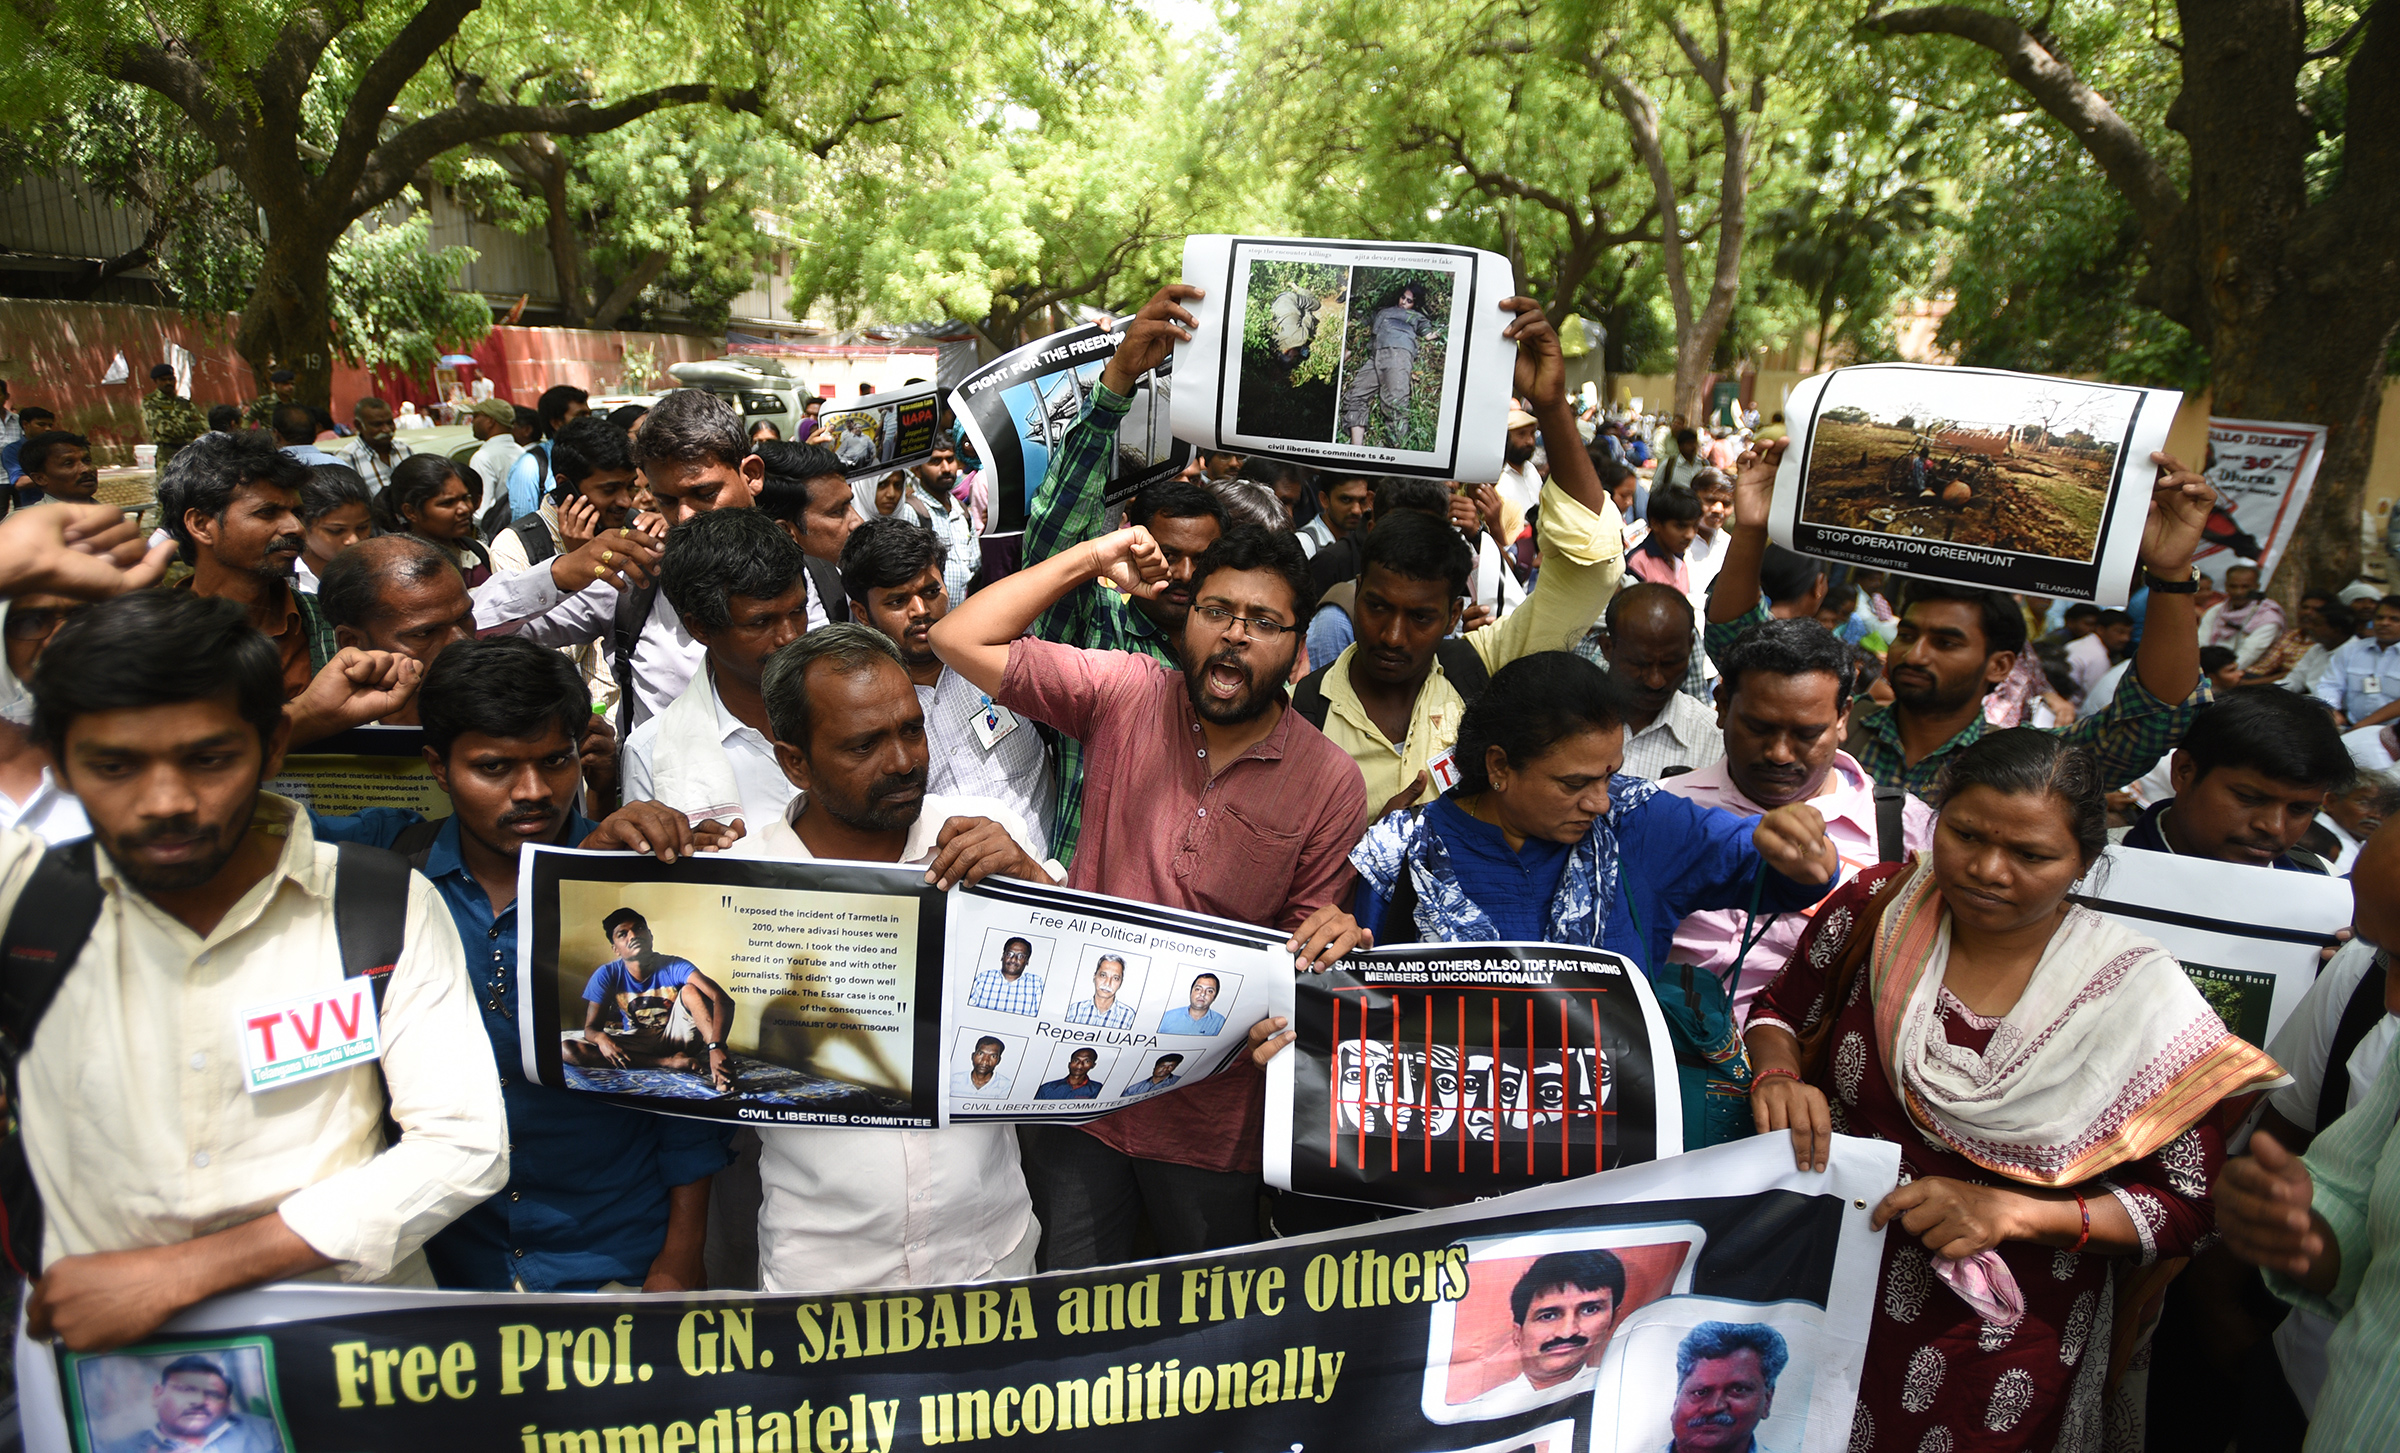 CDRO activists during the protest march for demanding release of Professor G.N. Saibaba and five others sentenced to life imprisonment in Nagpur prison on April 30, 2017 in New Delhi, India.